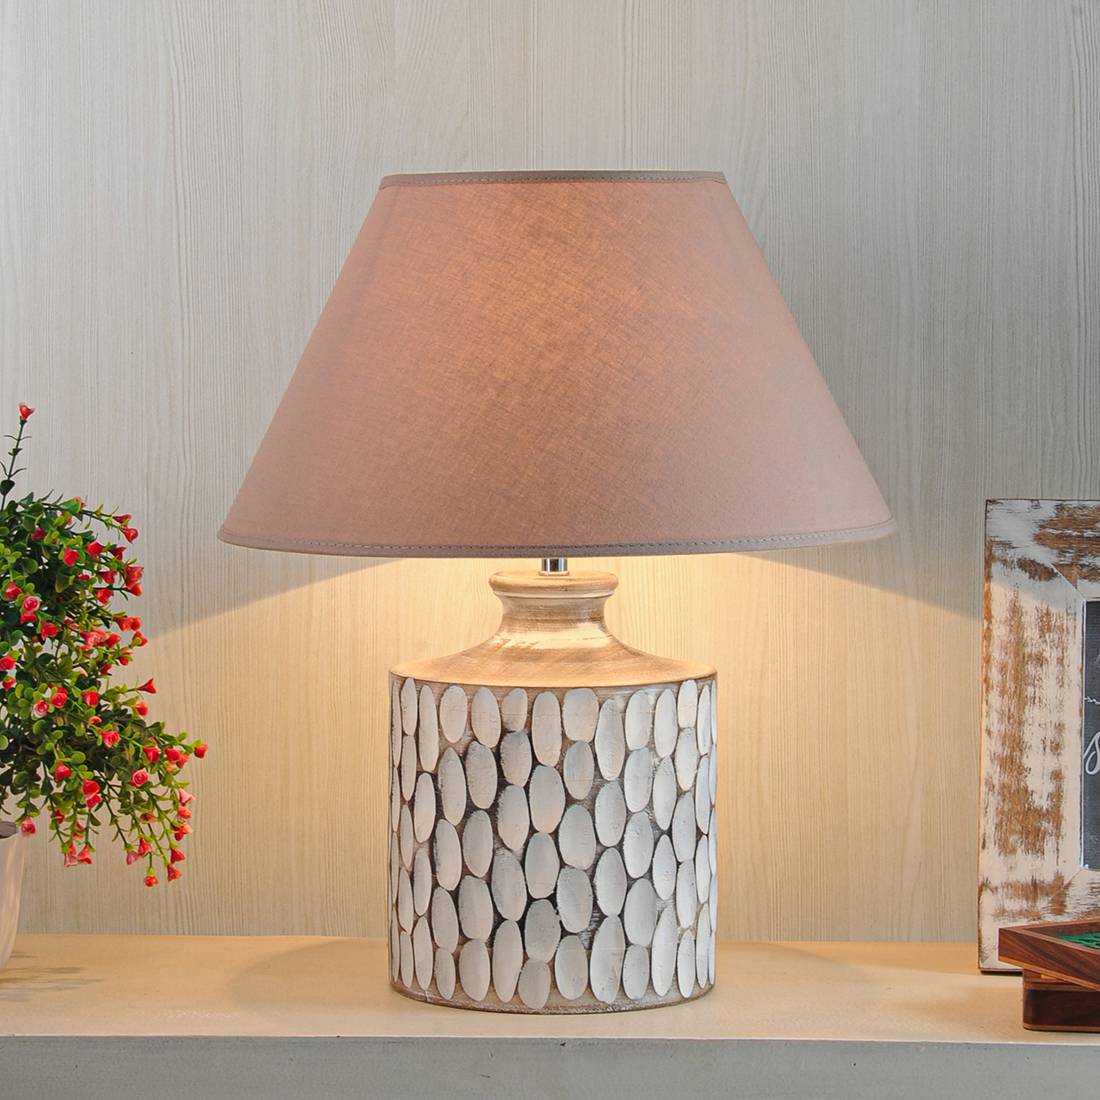 Table Lamp Lamps, Latest Table Lamps Designs